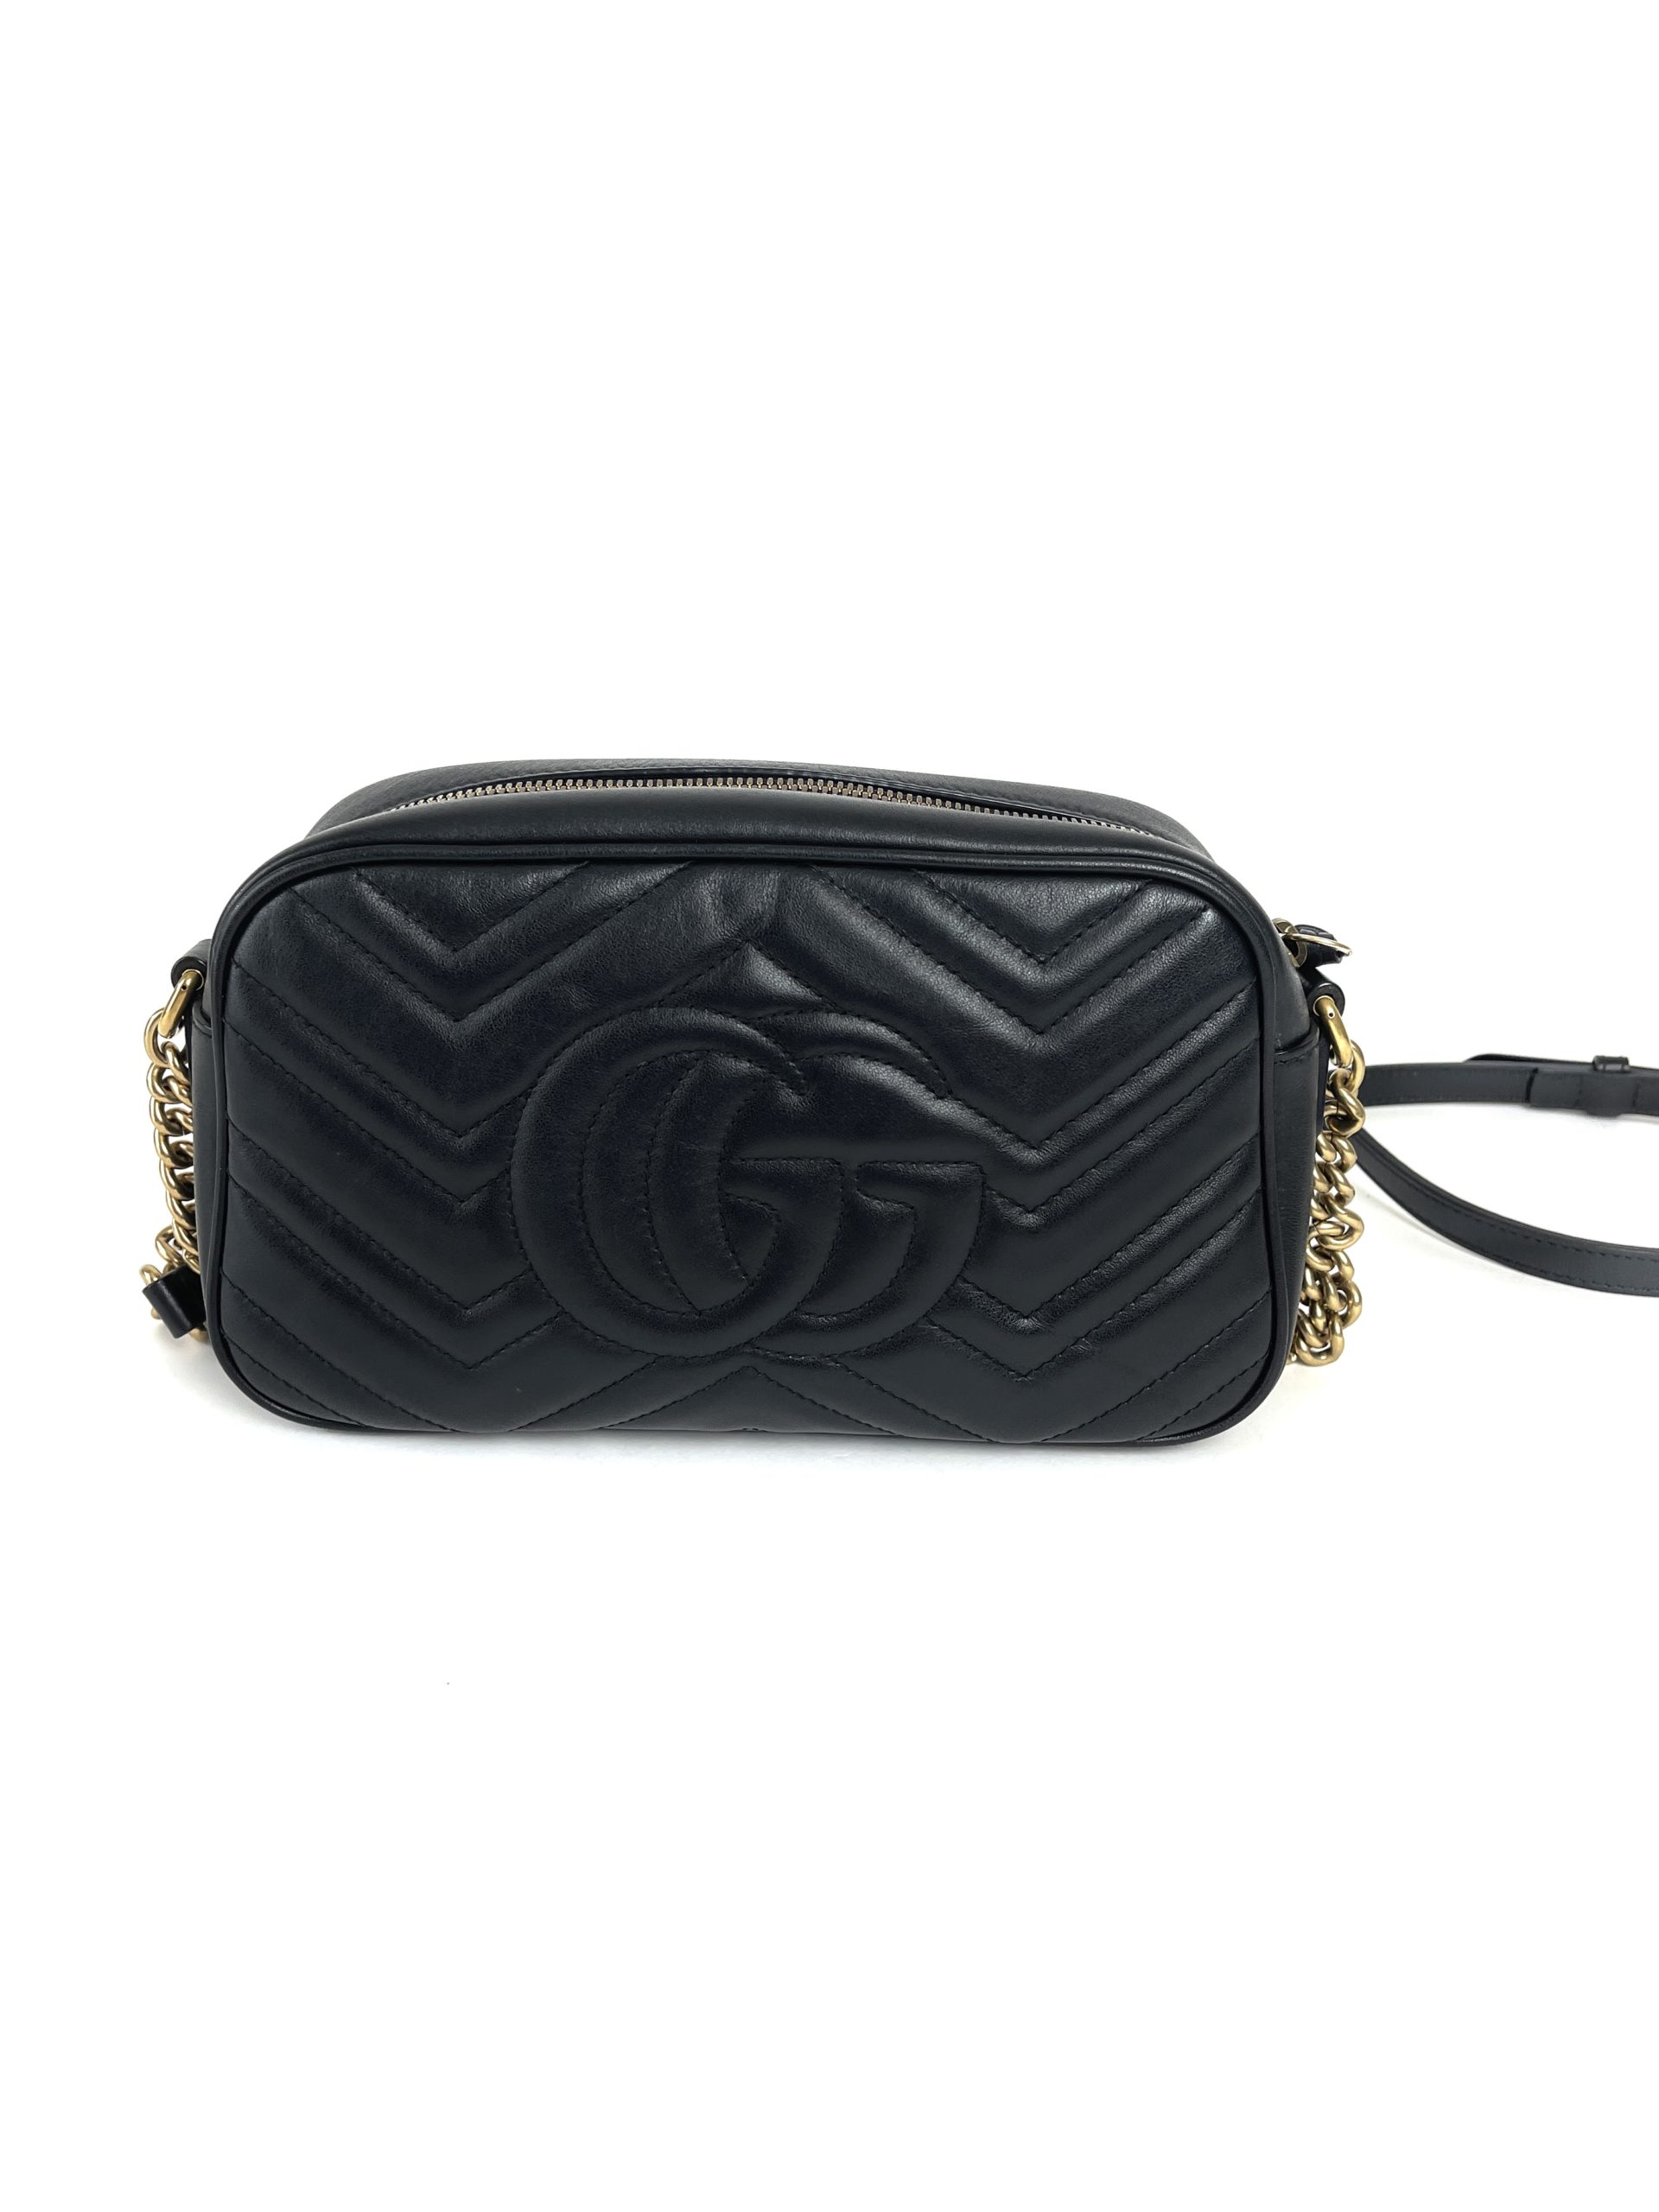 Gucci GG Marmont Zip Around Camera Bag Matelasse Leather Small at